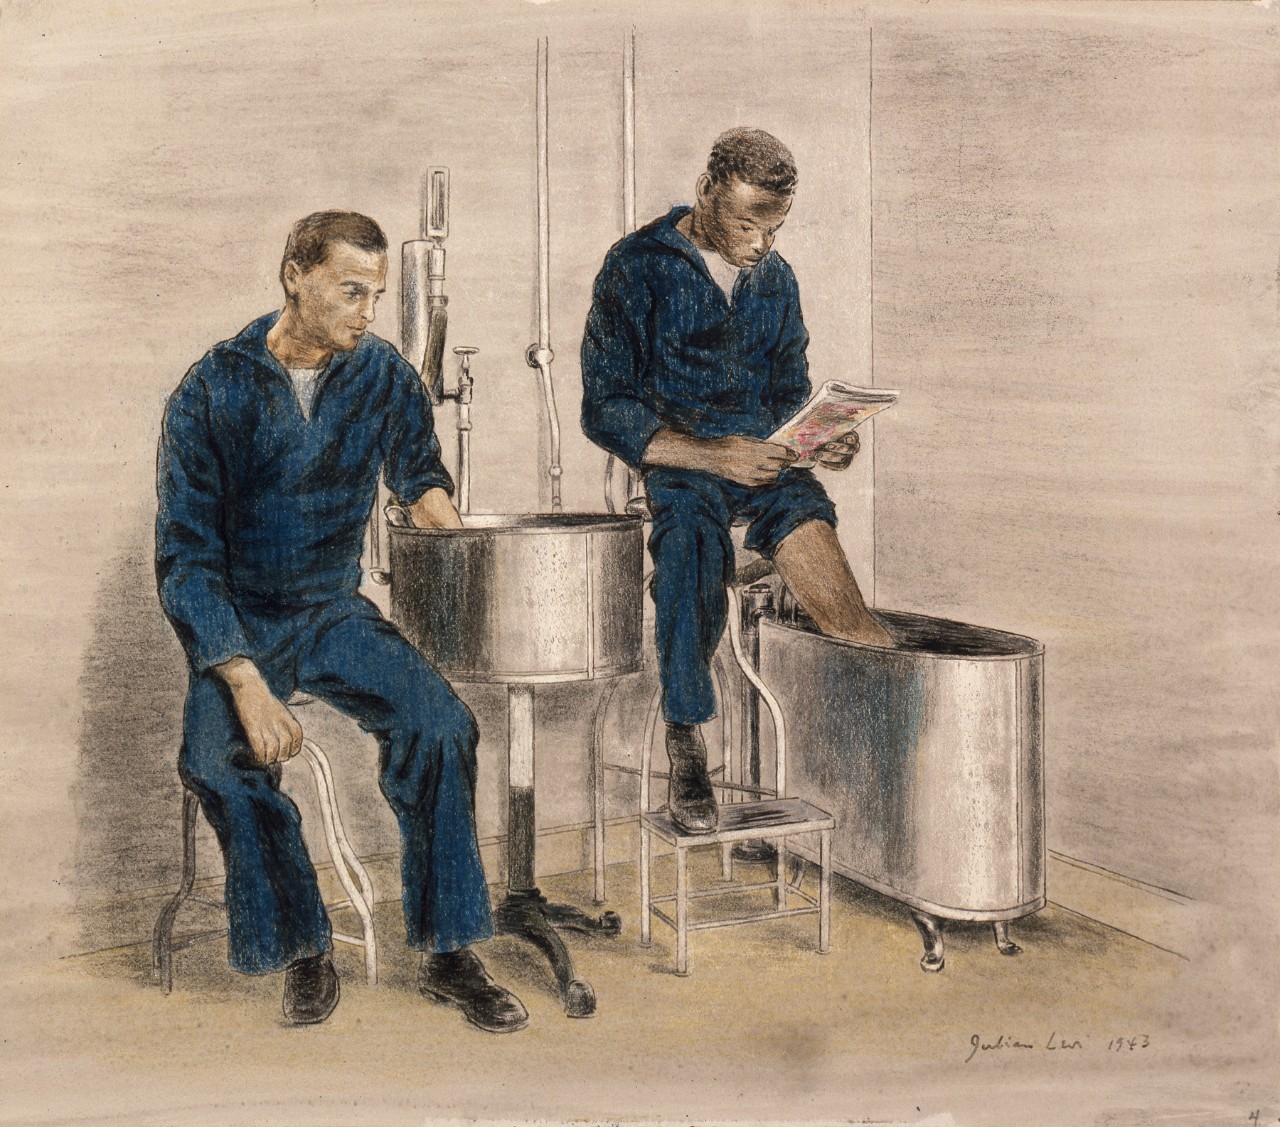 Two sailors are using hydrotherapy tanks one is treating his arm the other his leg